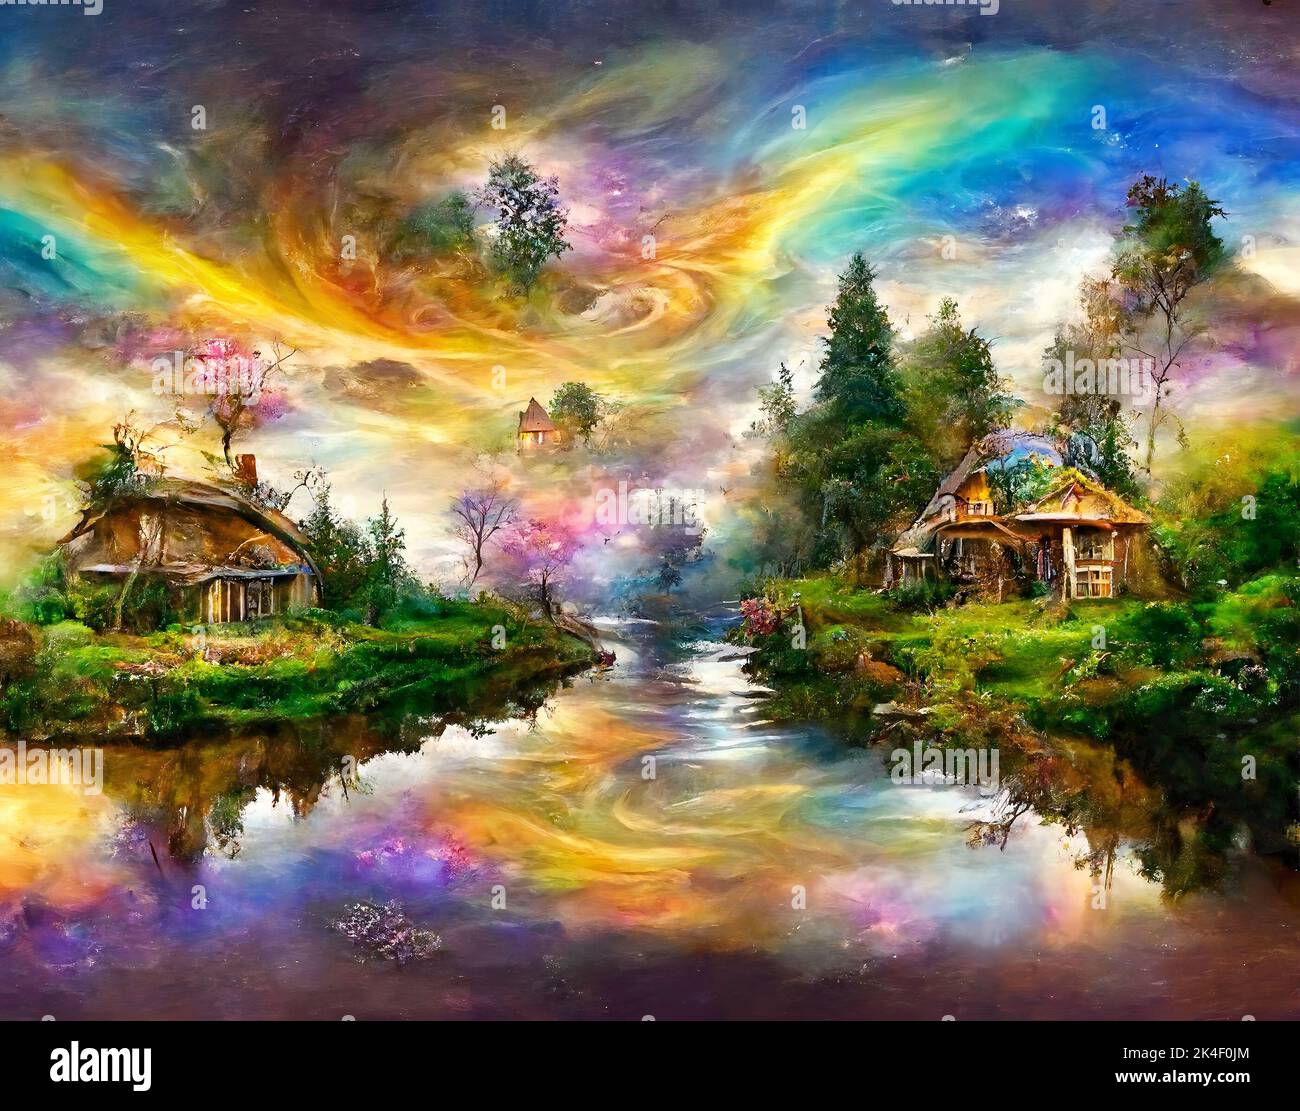 Fantasy cottage in autumn landscape with colorfull leave and fog. Stock Photo